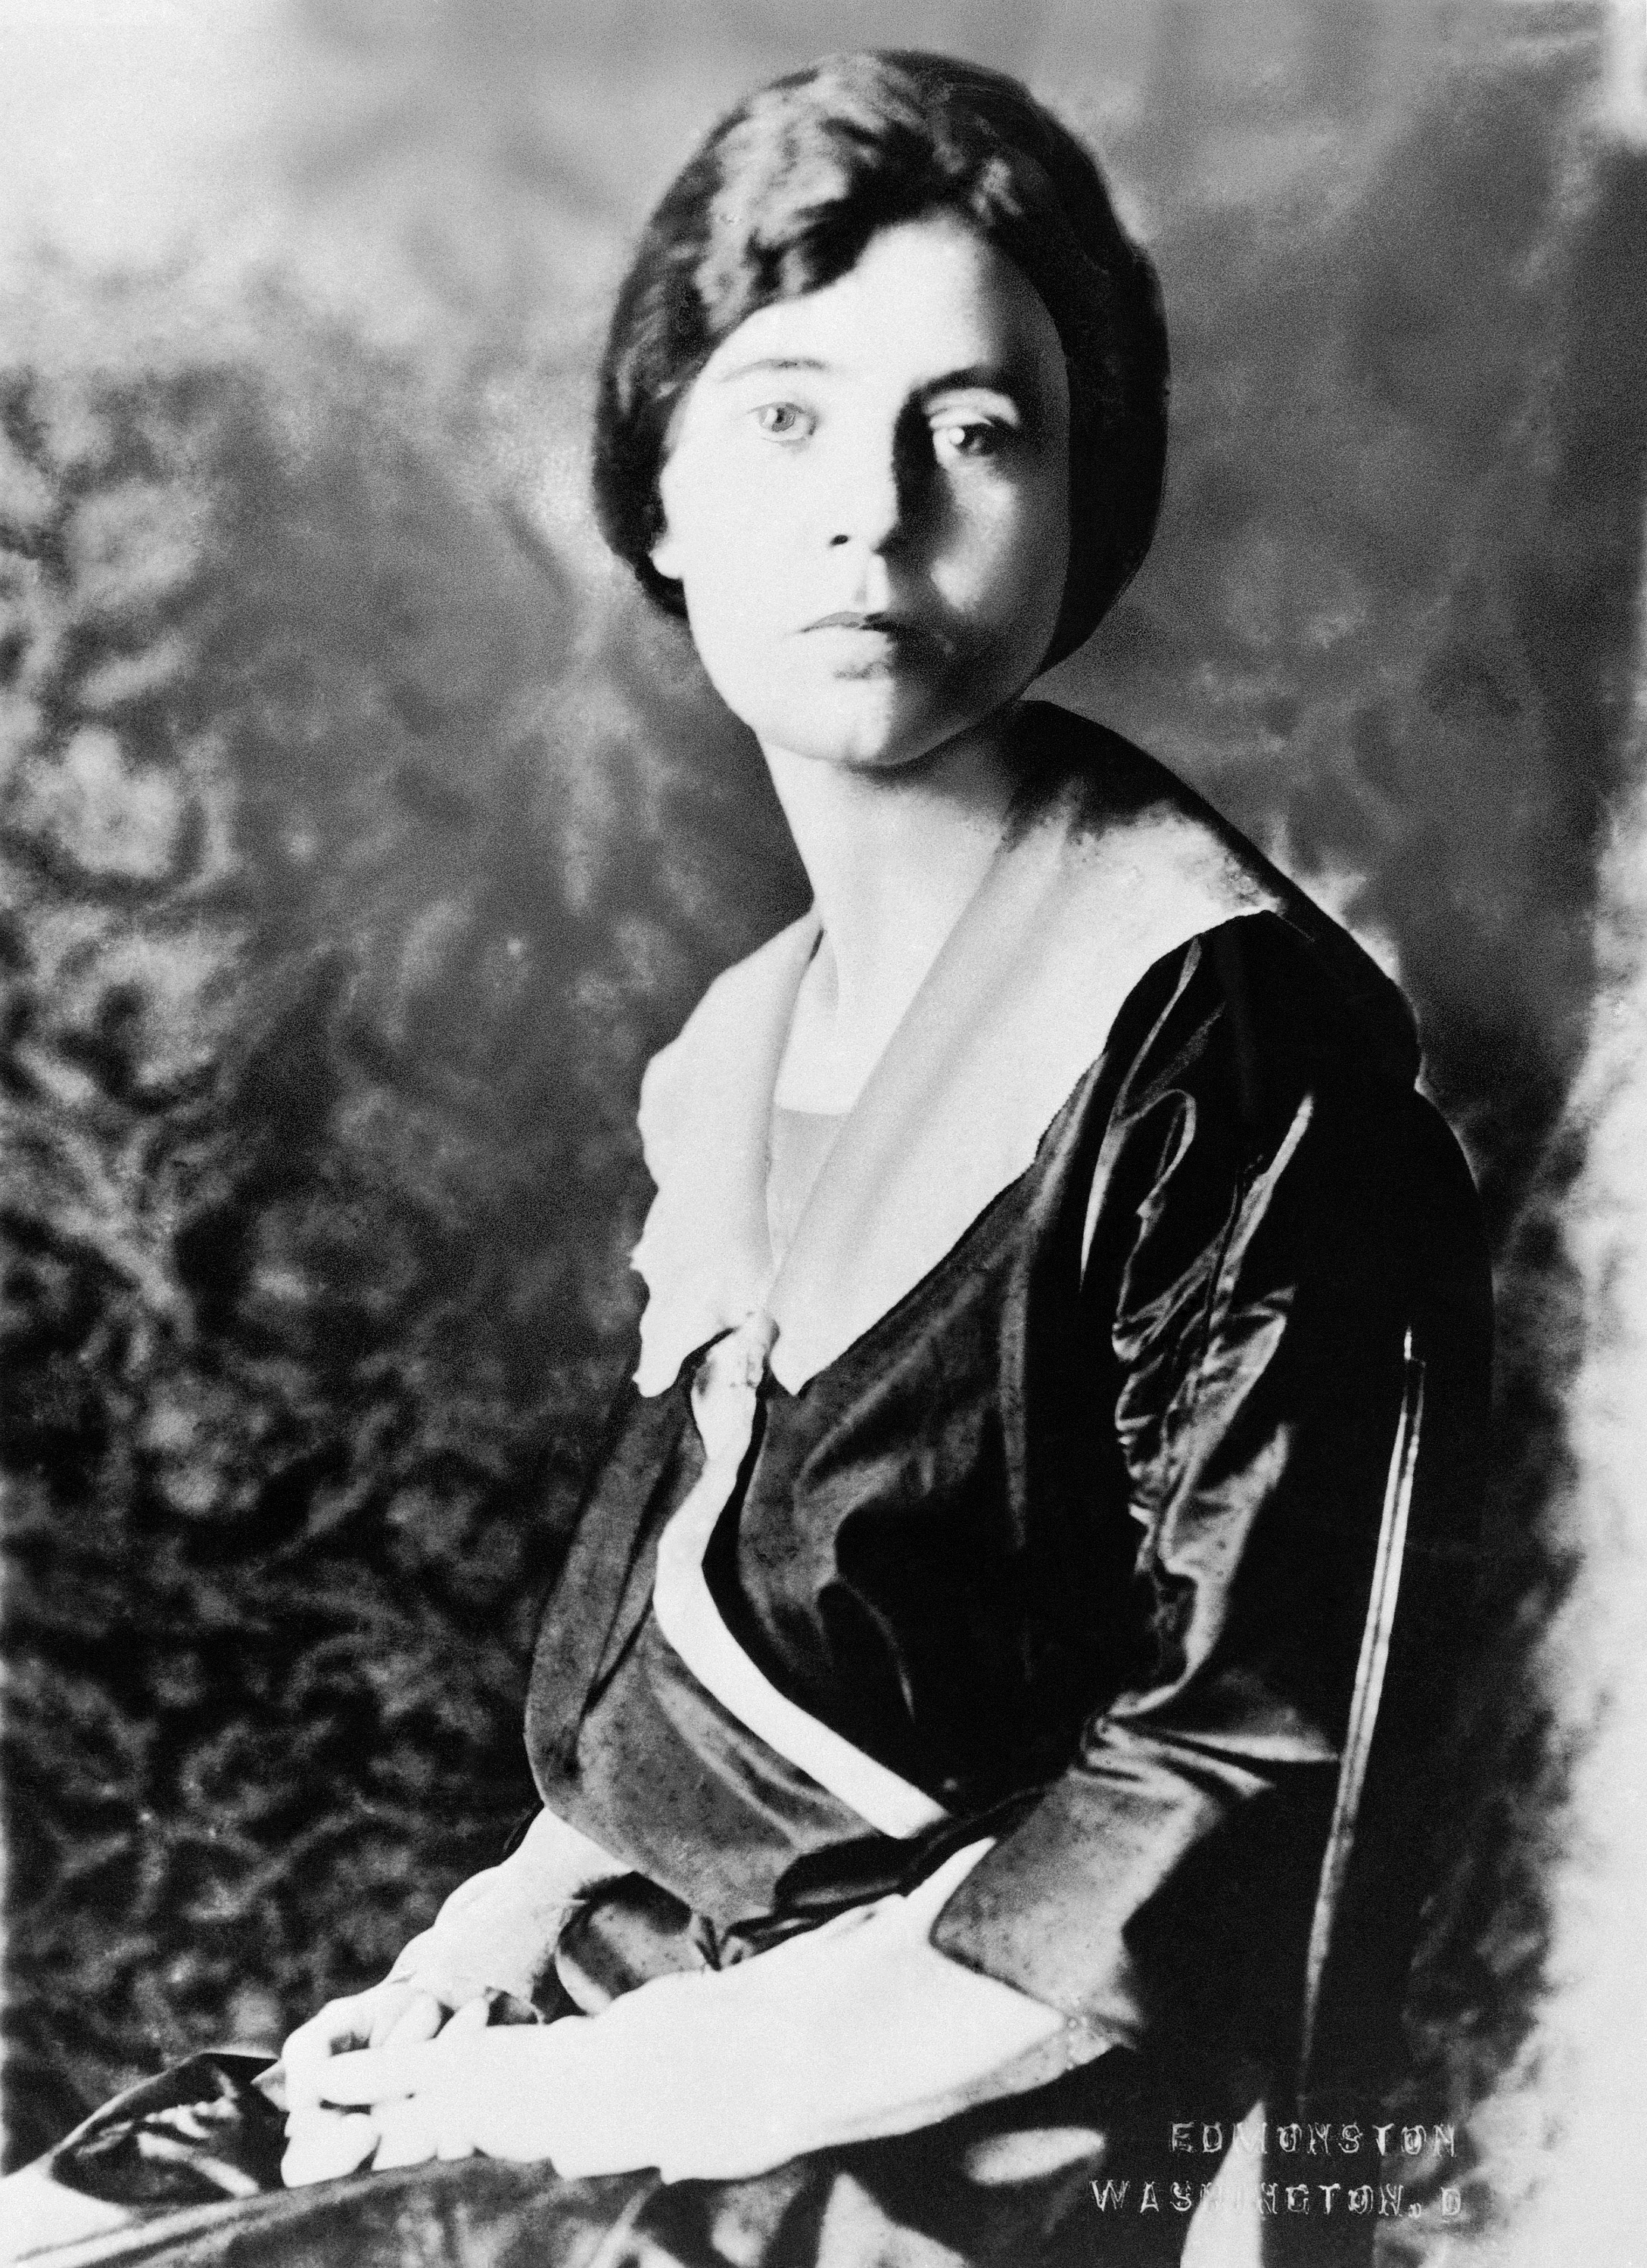 Alice Paul of Moorestown, N.J., Chairman of the World Women's Party for equal rights. 1915 photo.